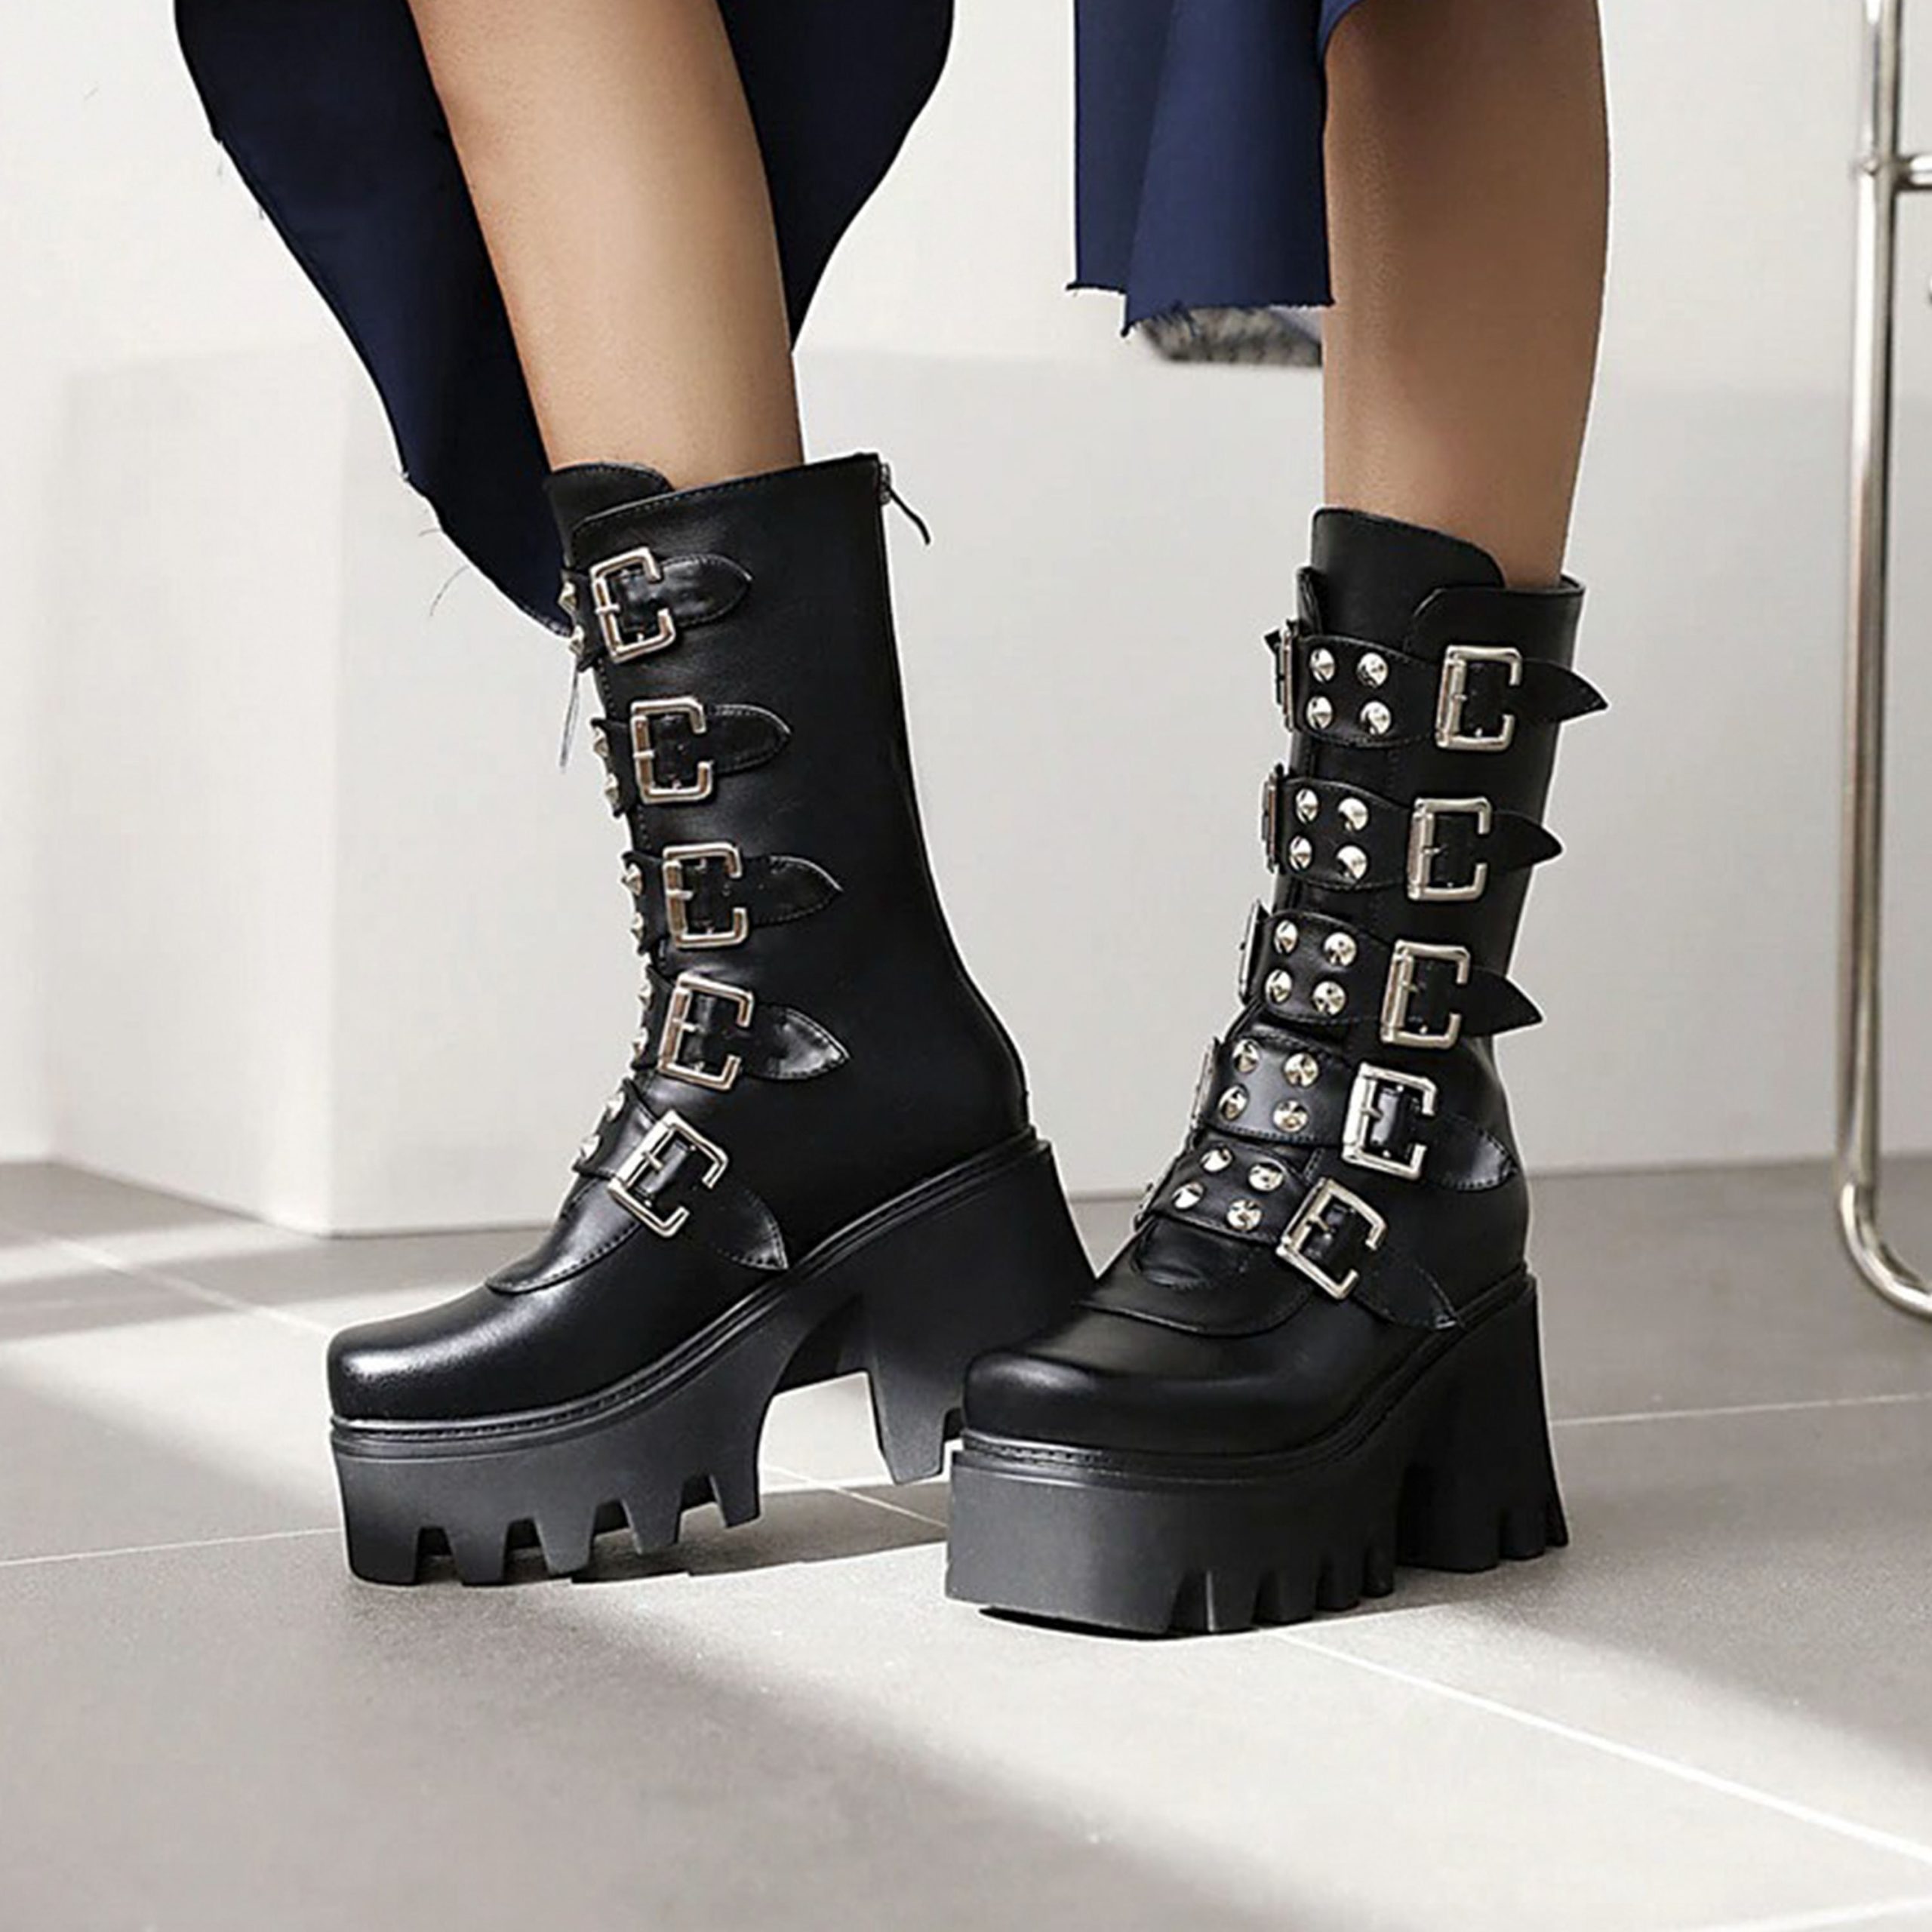 Goth Platform Shoes Motorcycle Boot Platform Shoes Chunky Shoes Gothic Boots Biker Boot Goth Shoes High Heels Lace Up Shoes